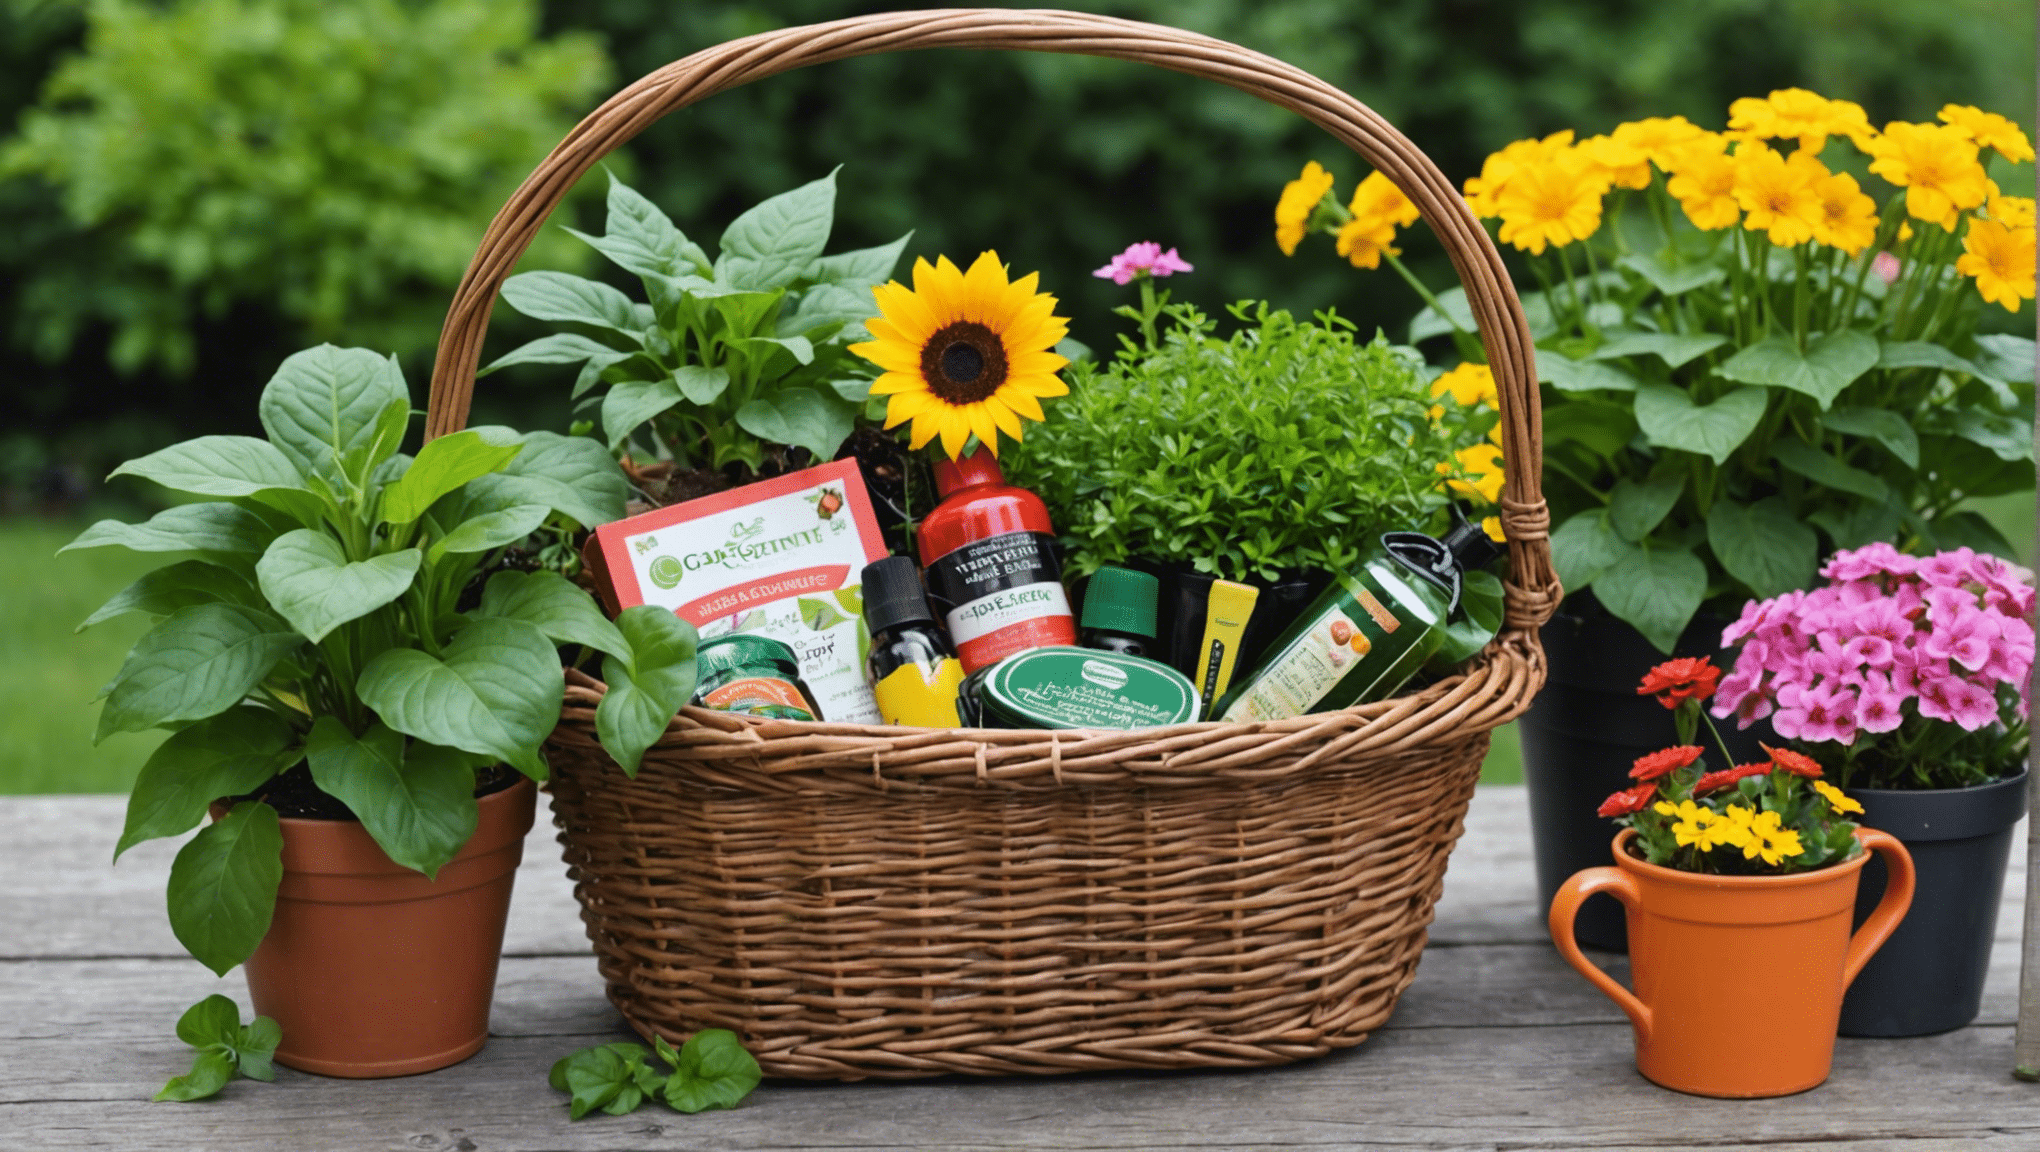 discover unique and creative diy gardening gift basket ideas to delight any gardening enthusiast. find inspiration for thoughtful and personalized gifts.